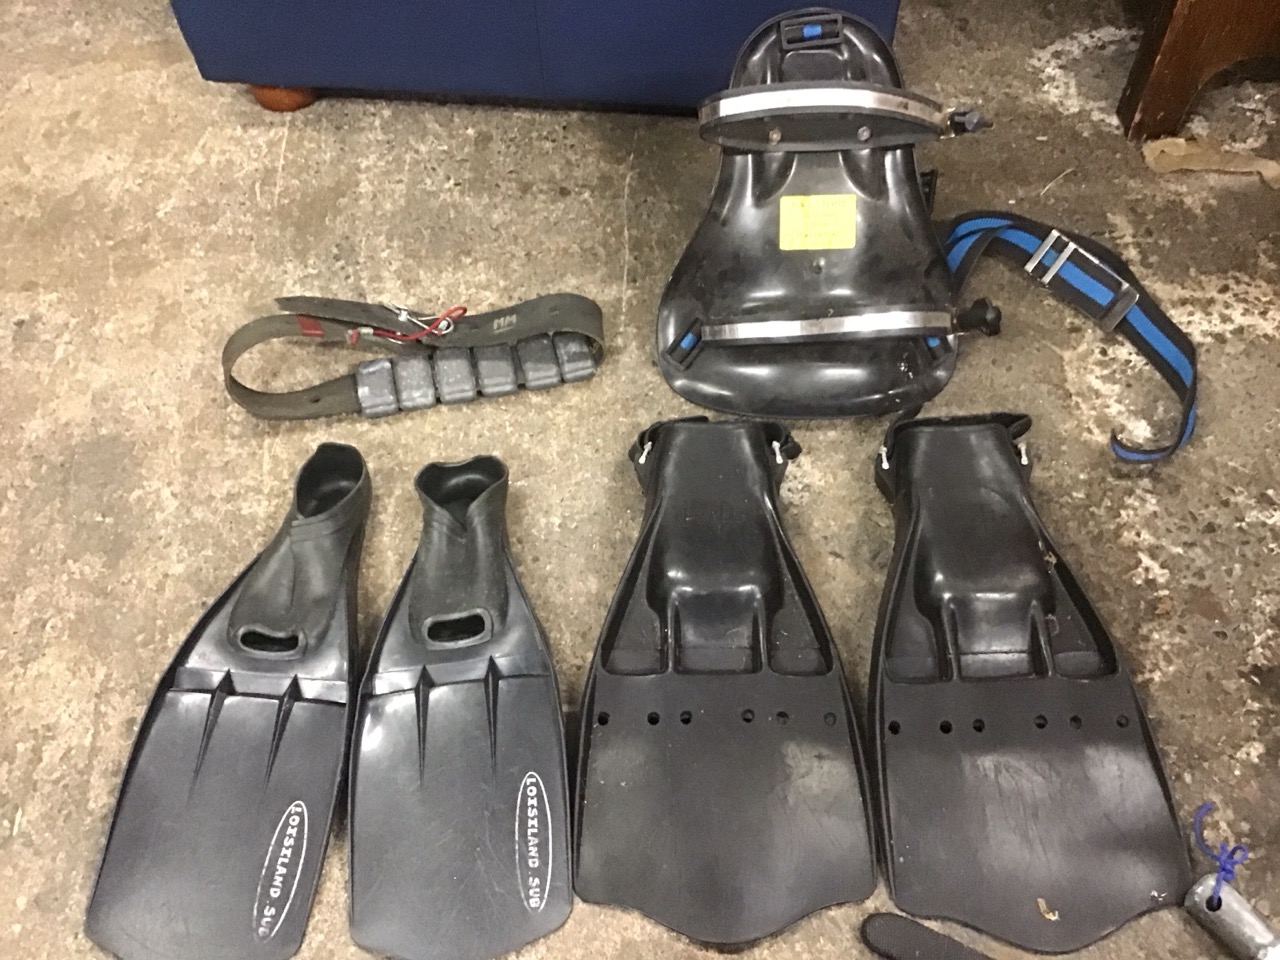 Miscellaneous diving equipment including a Namron scuba tank harness, a floater board, a pair of - Image 2 of 3